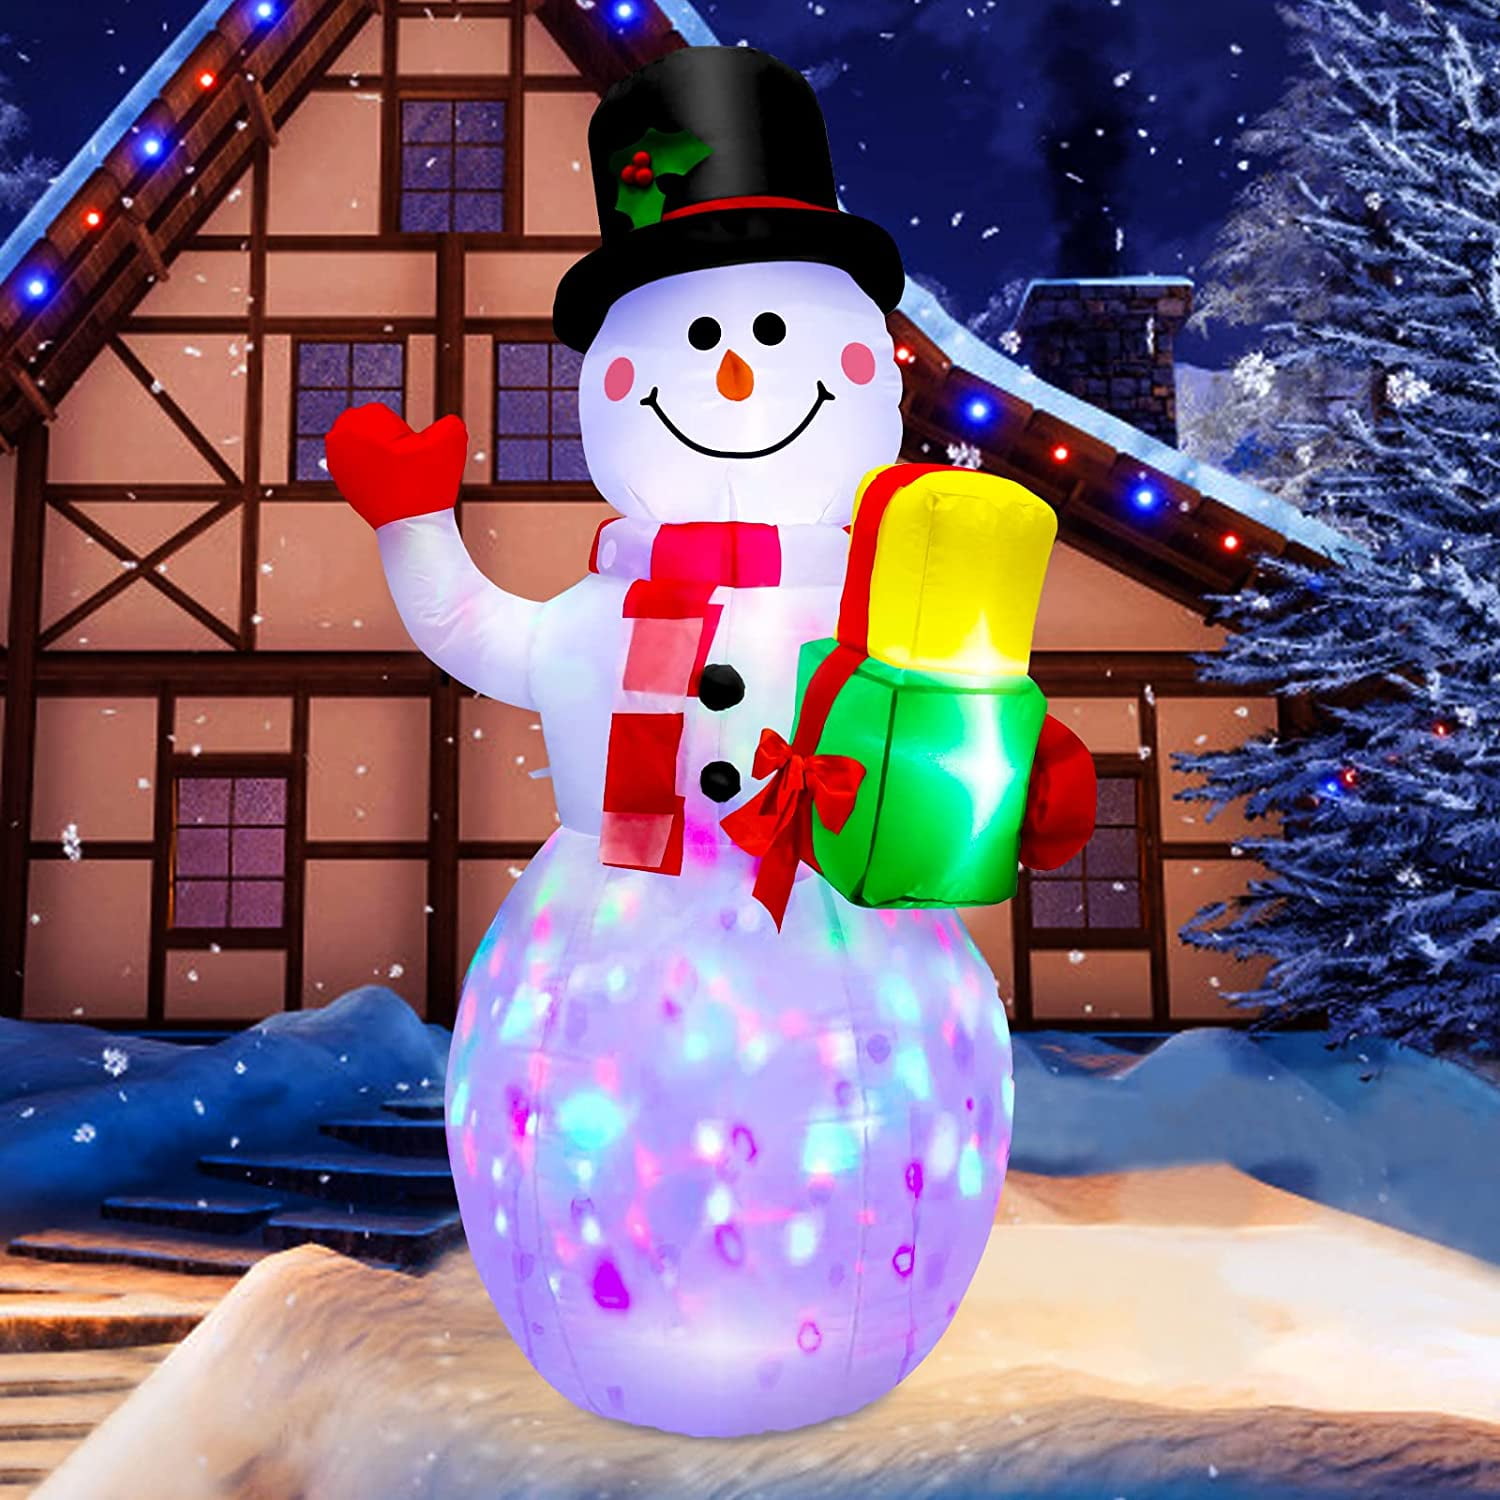 Christmas Inflatables Outdoor Decorations, 5FT Inflatable Snowman ...